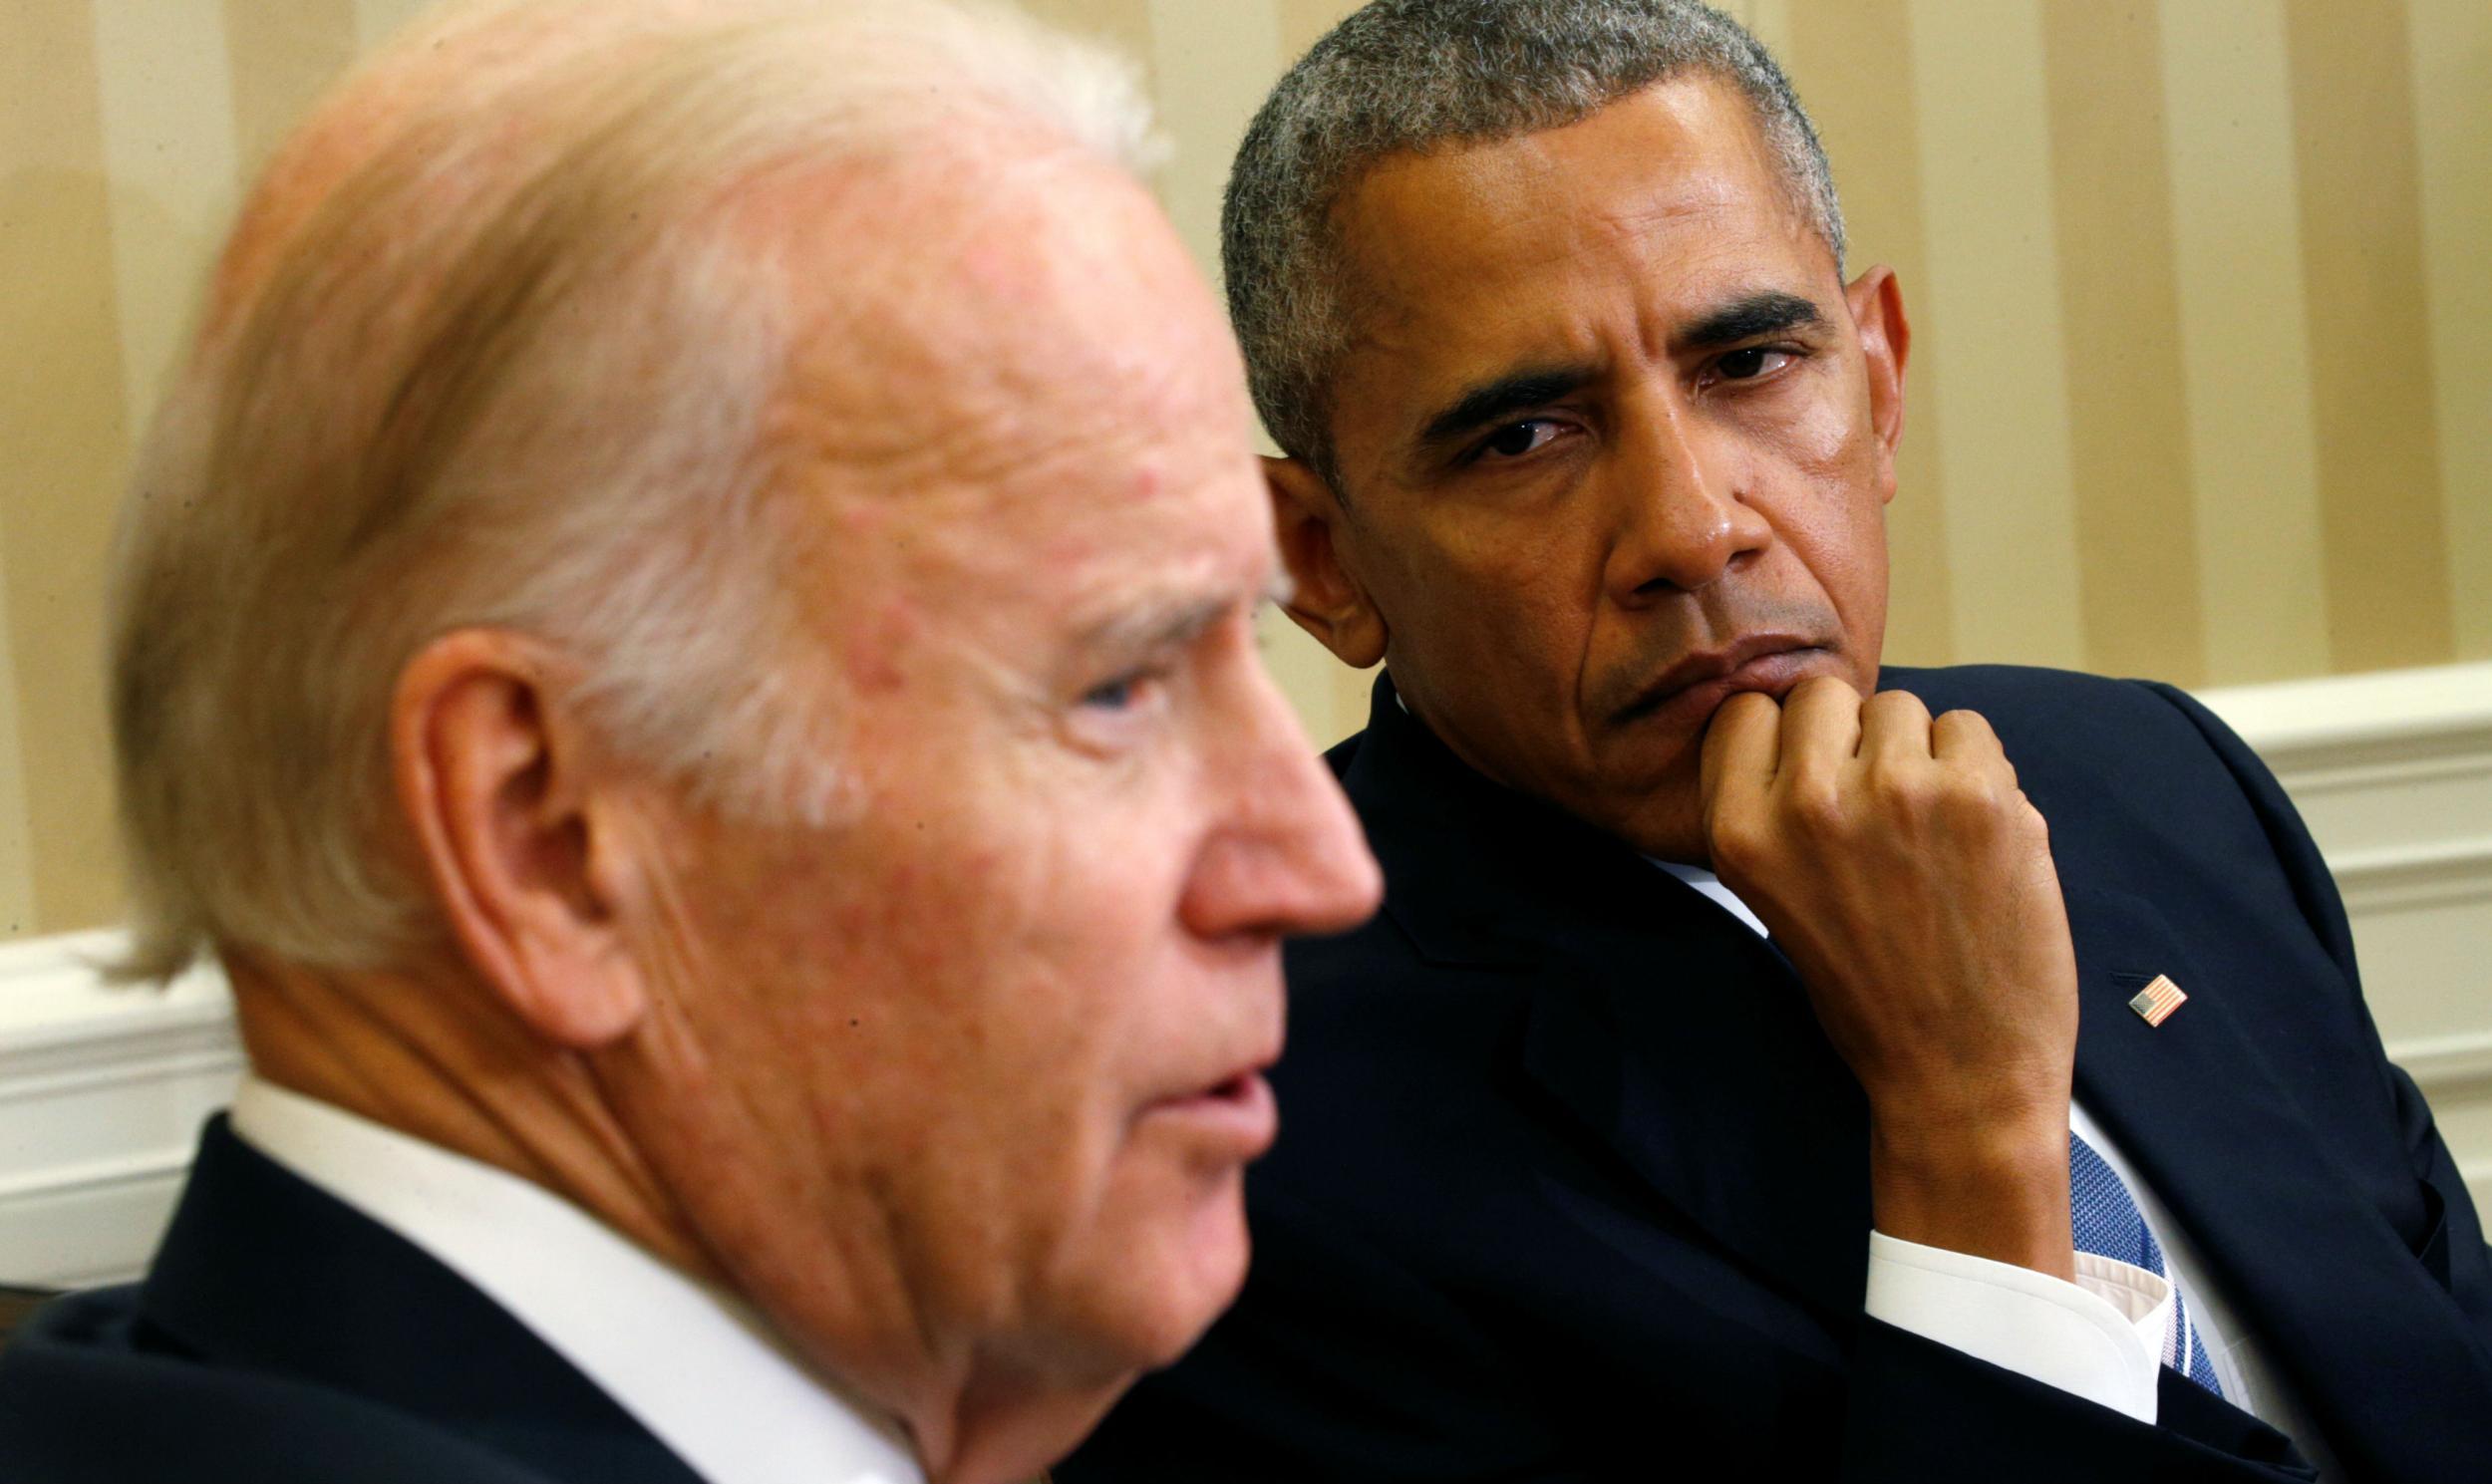 President Obama listens to Joe Biden speak of his work on defeating cancer on 18 October in the White House